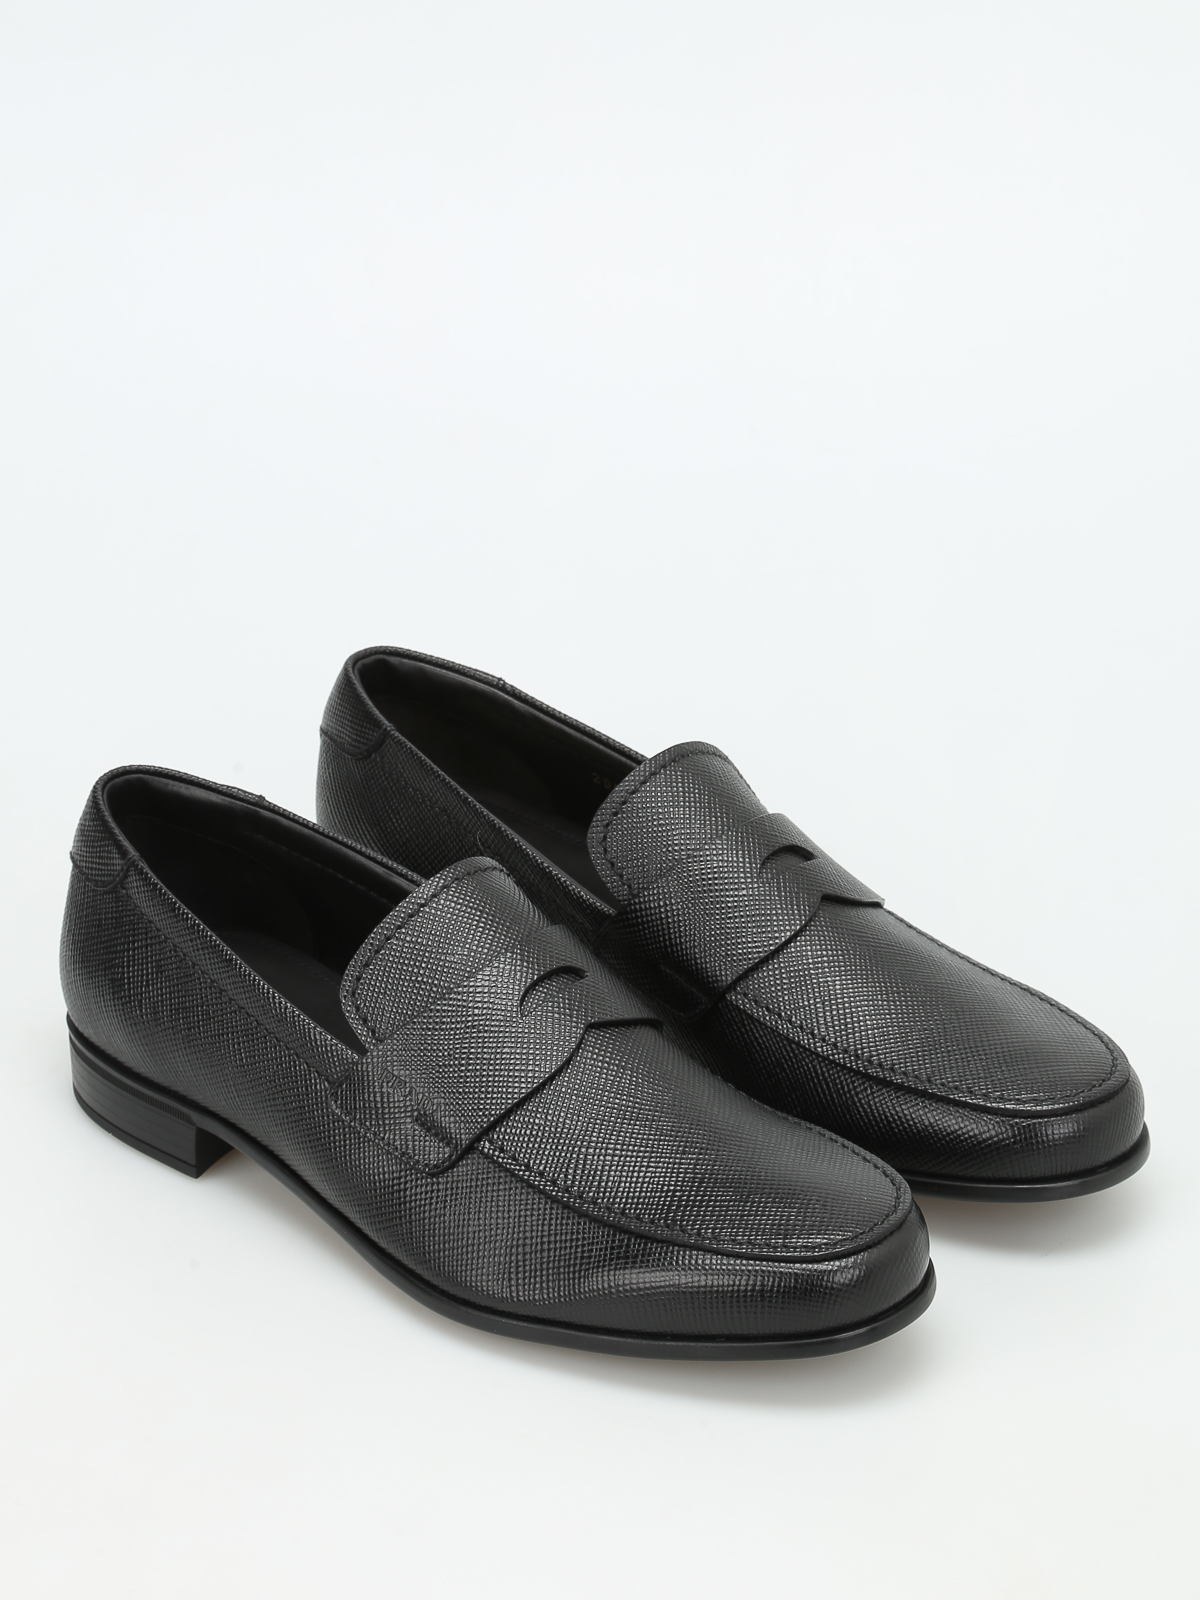 Loafers & Slippers Prada - Saffiano leather loafers - 2DB1373E0NF0002